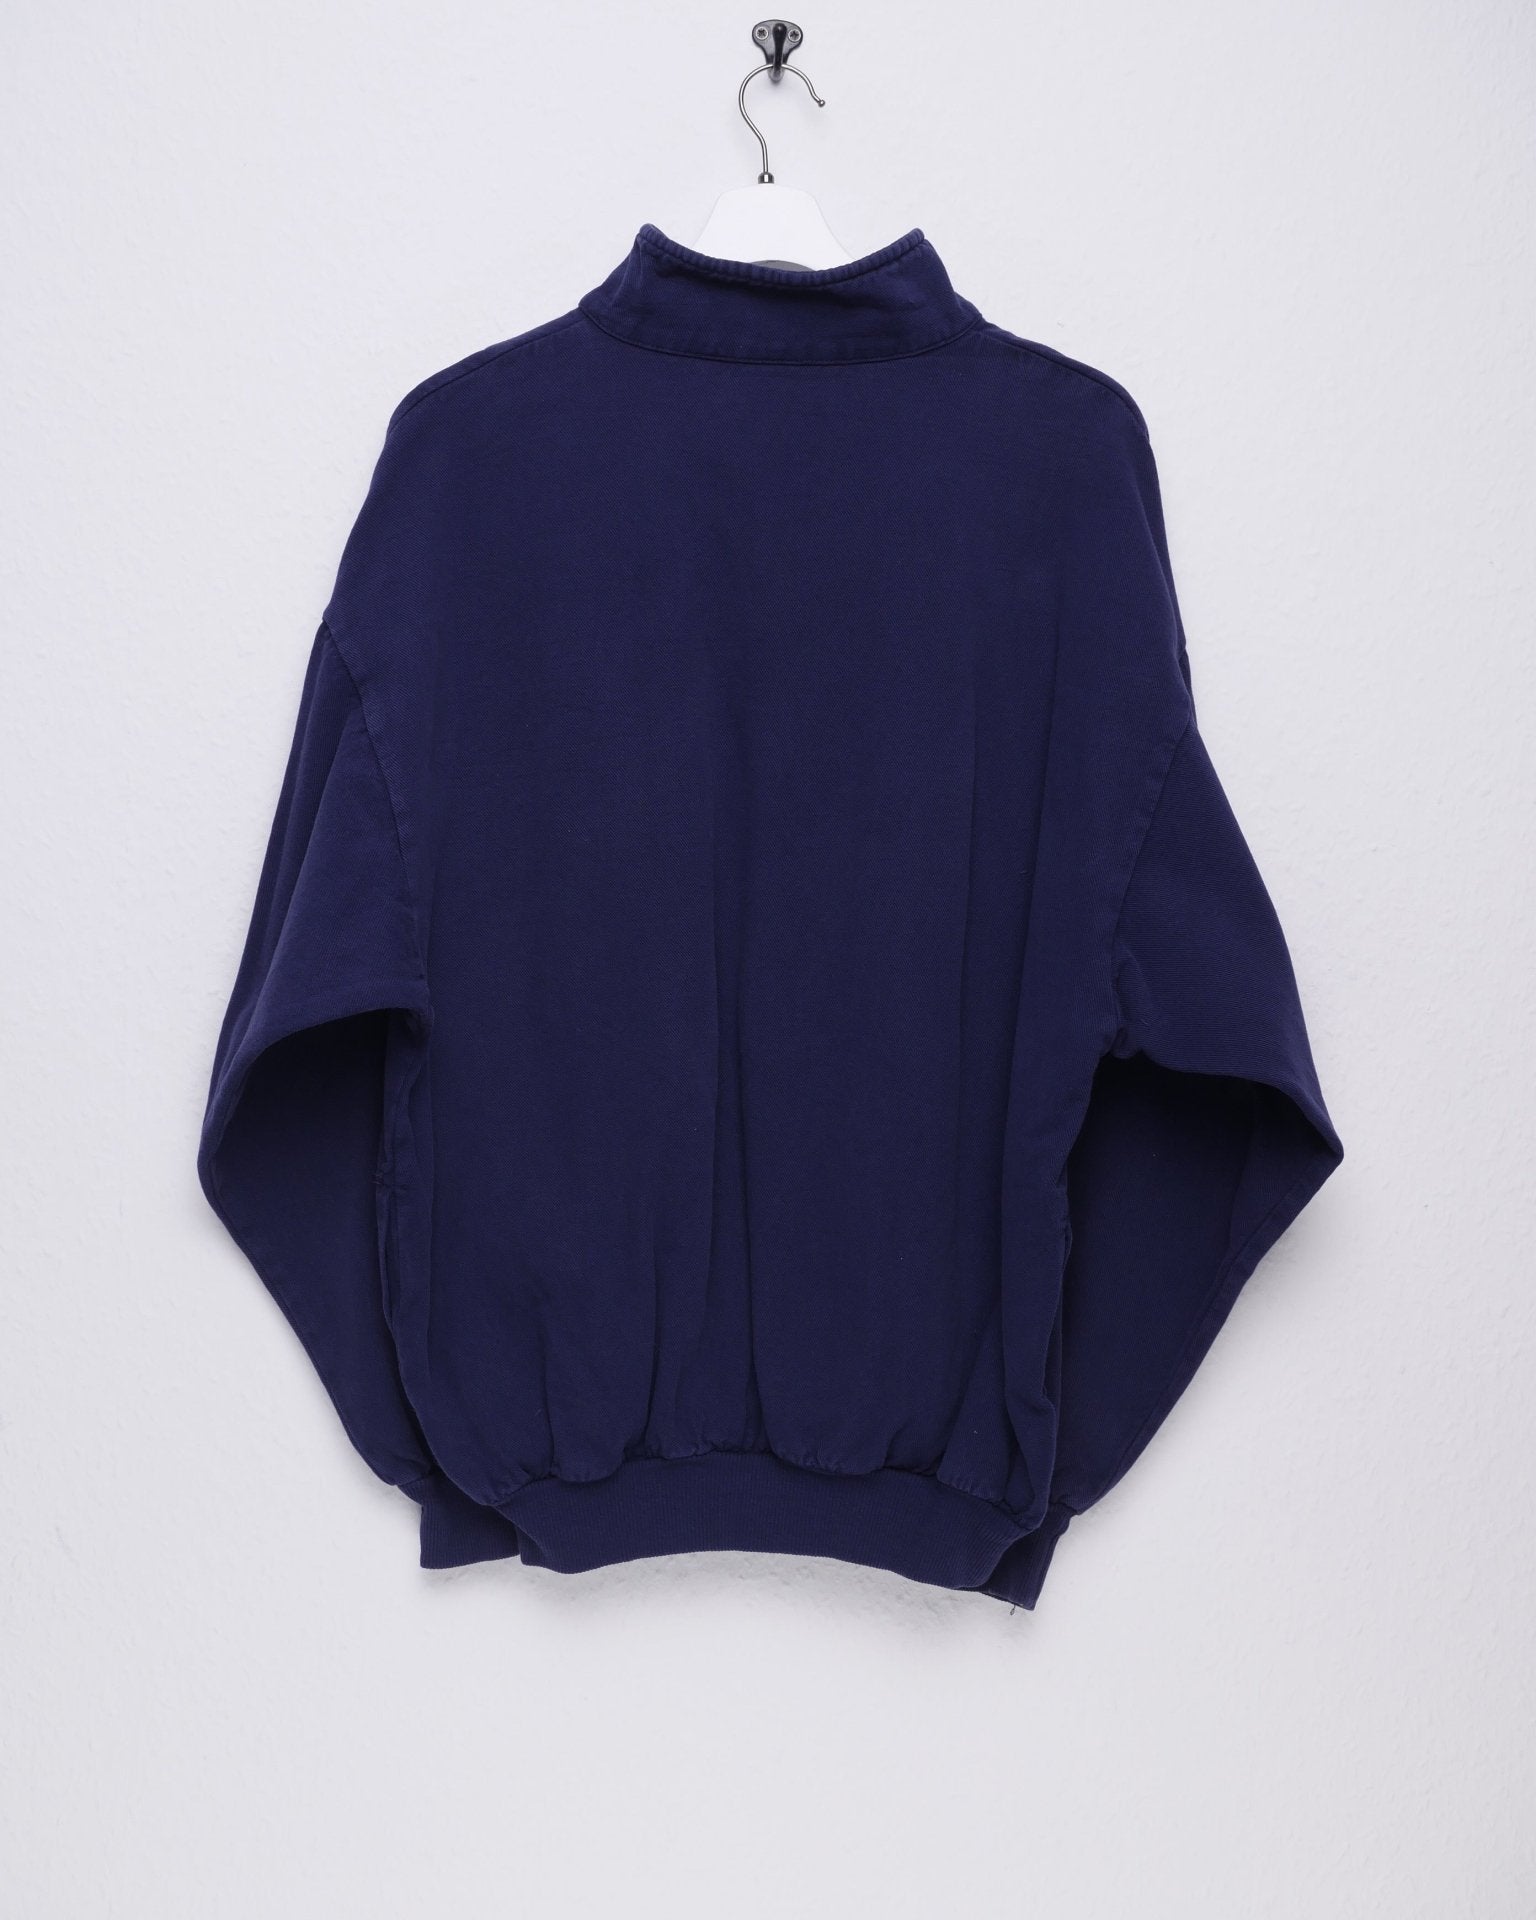 embroidered Logo navy Sweater - Peeces